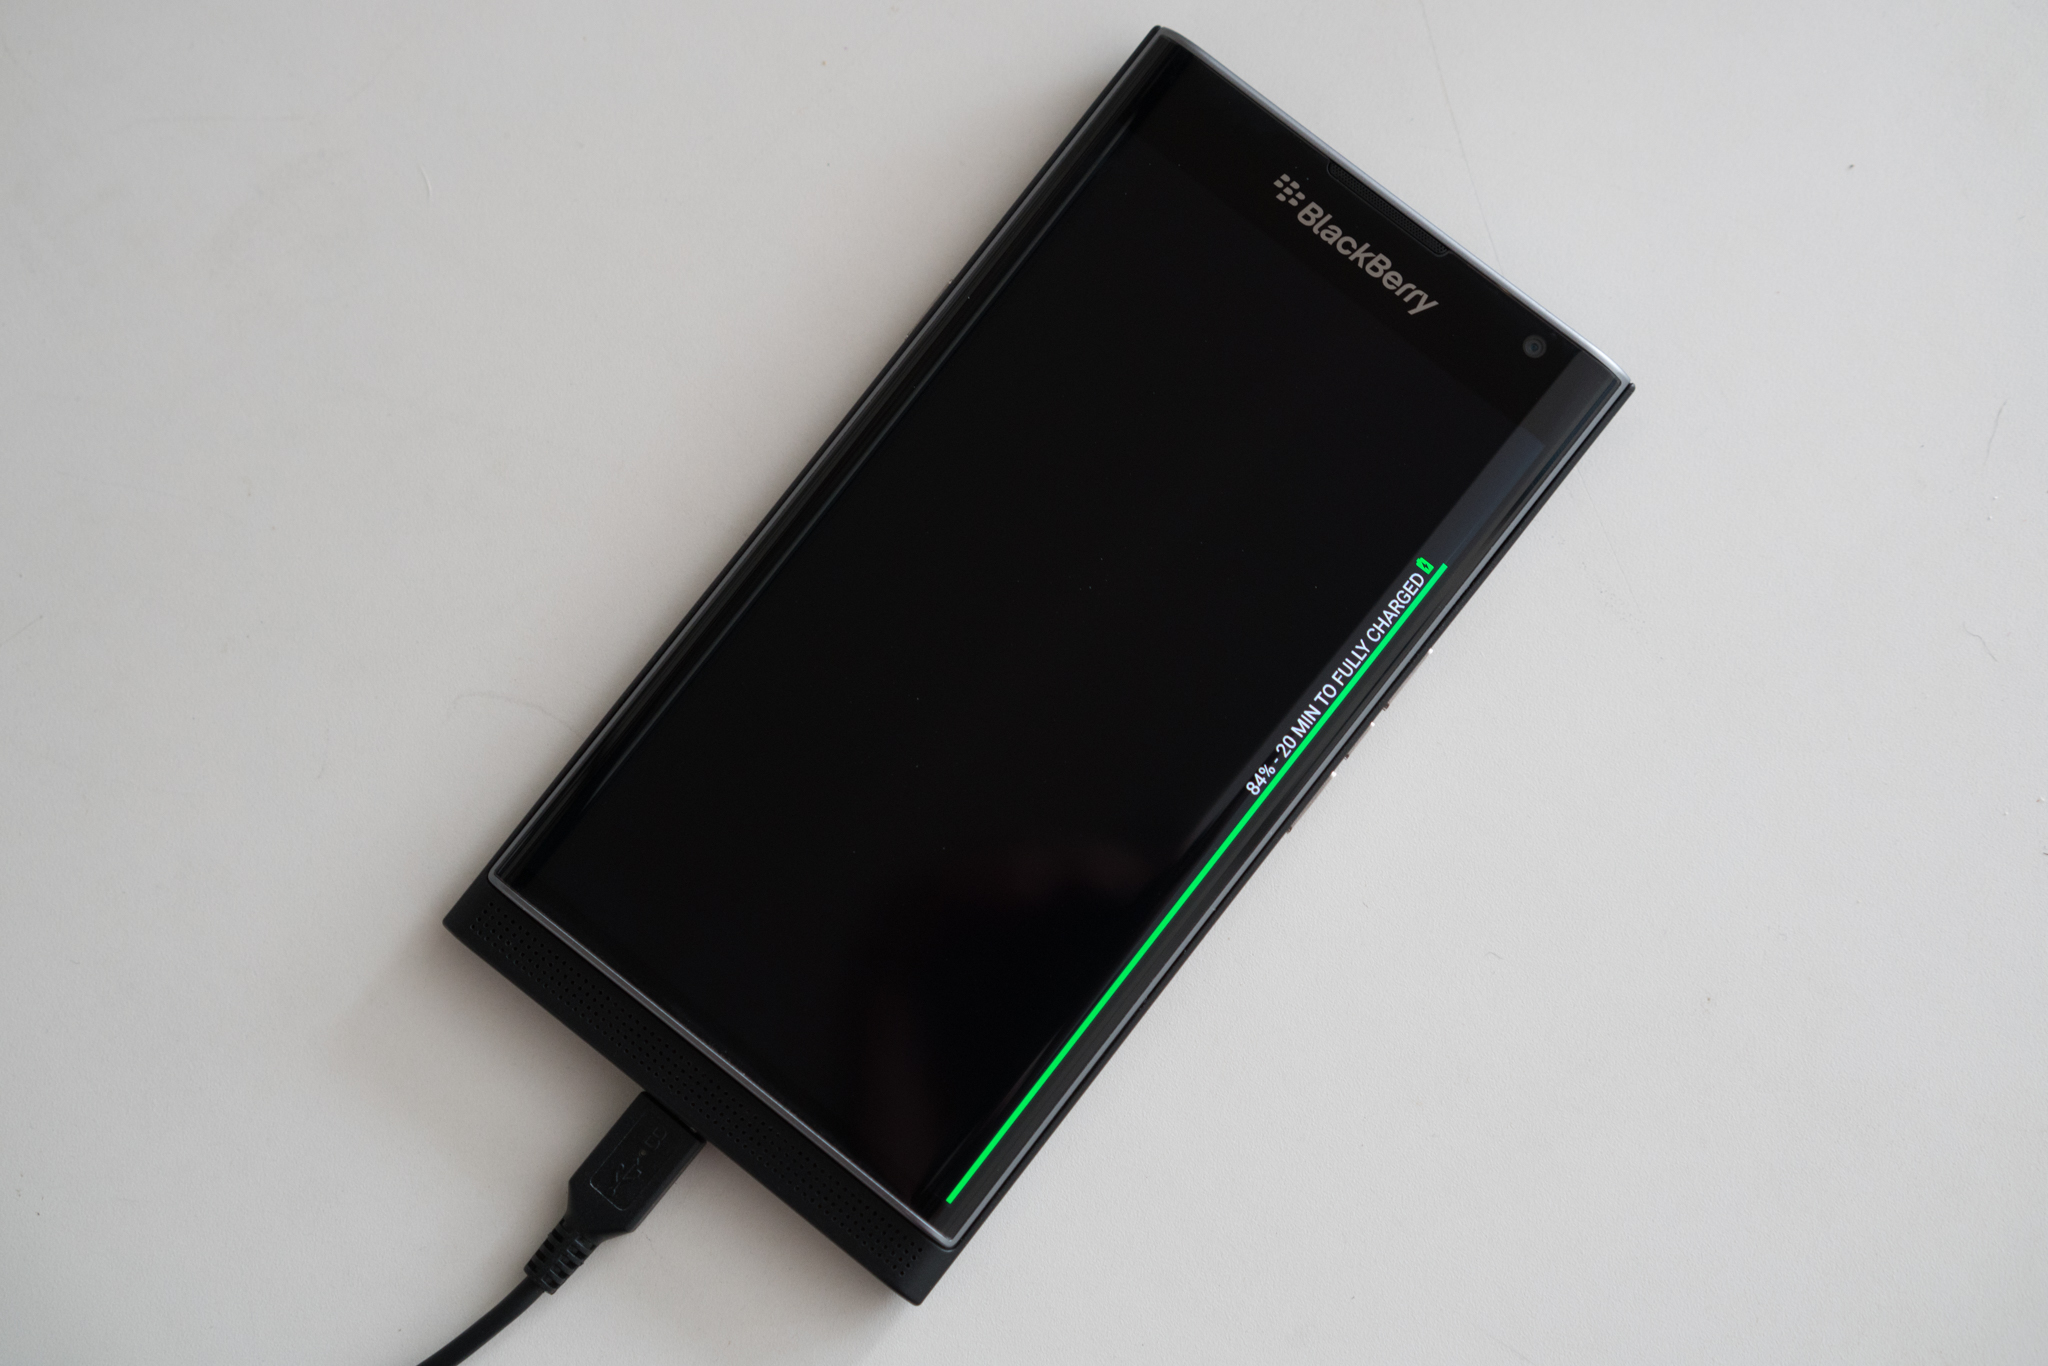 BlackBerry Priv review: Slick Android slider with niche appeal - CNET